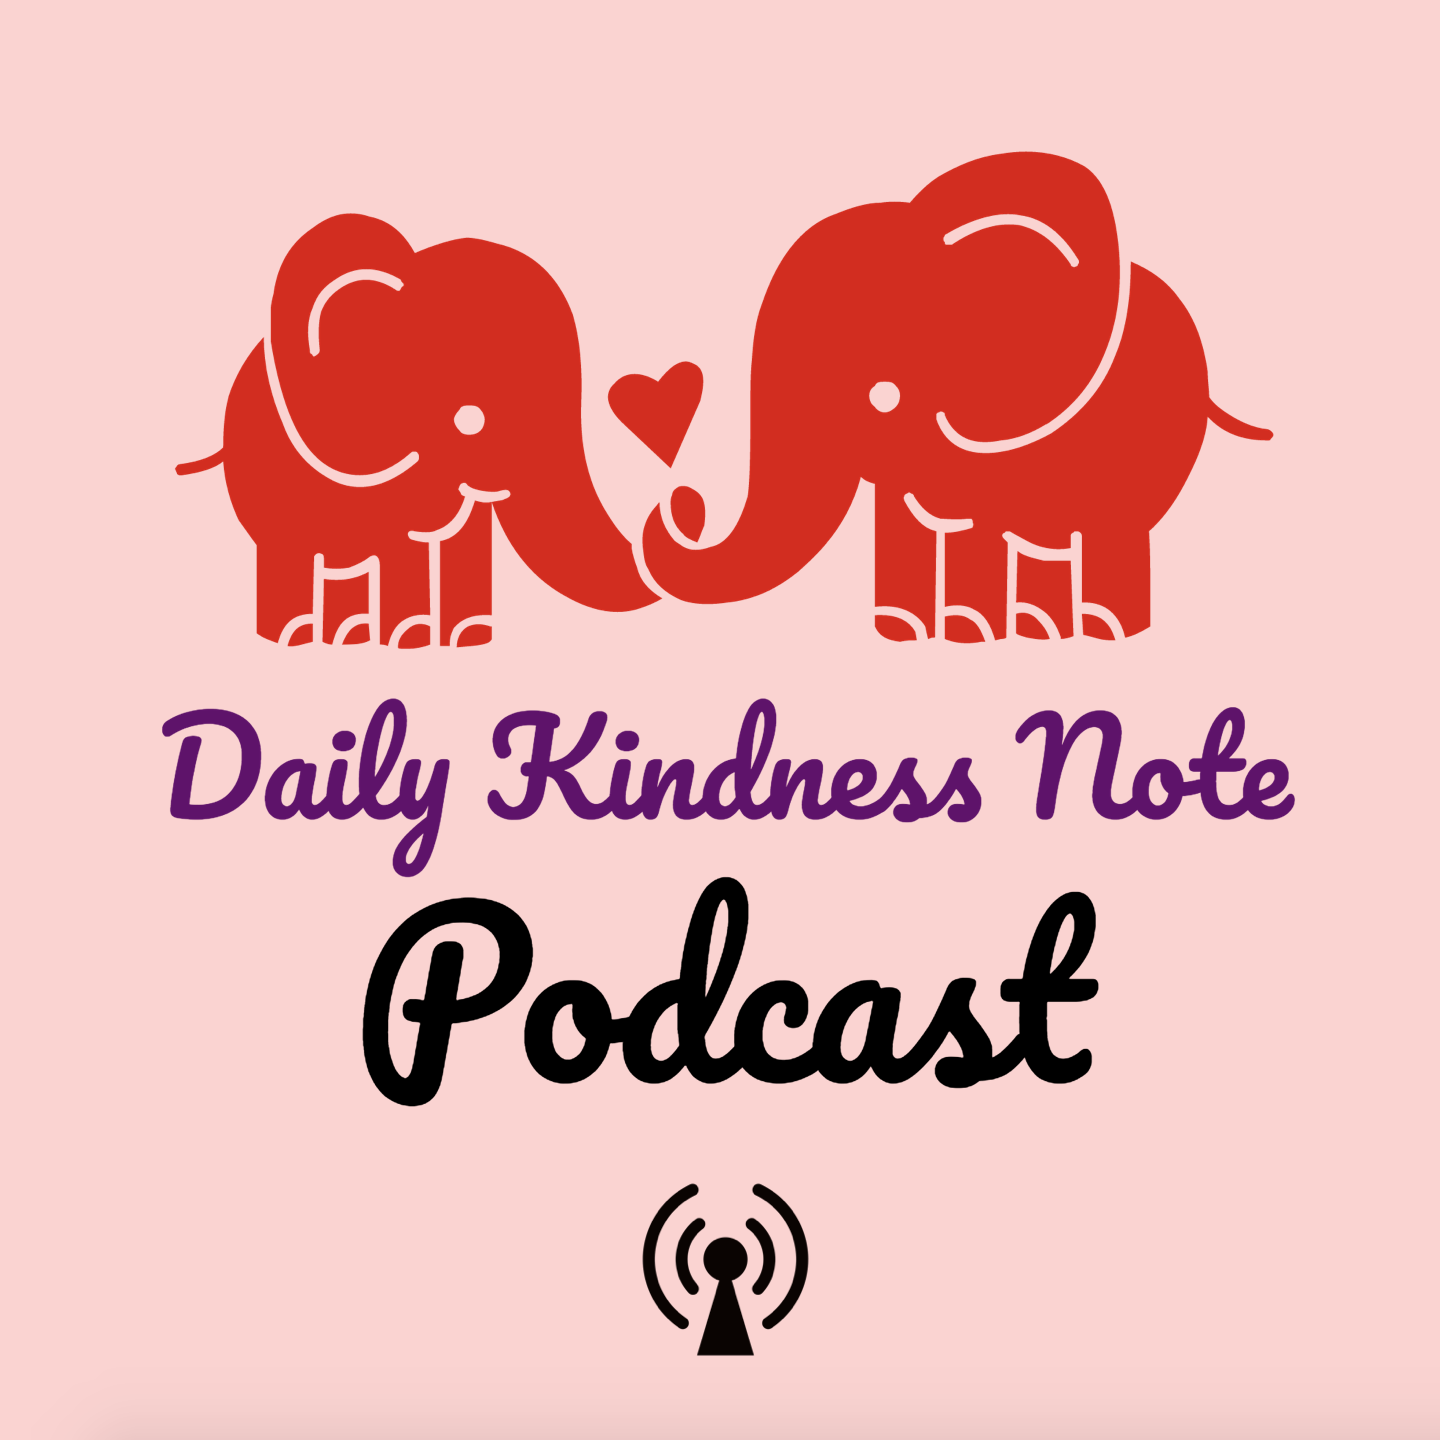 Daily Kindness Note Podcast - Ep. 9: Begin to Free Yourself One Small Step at a Time